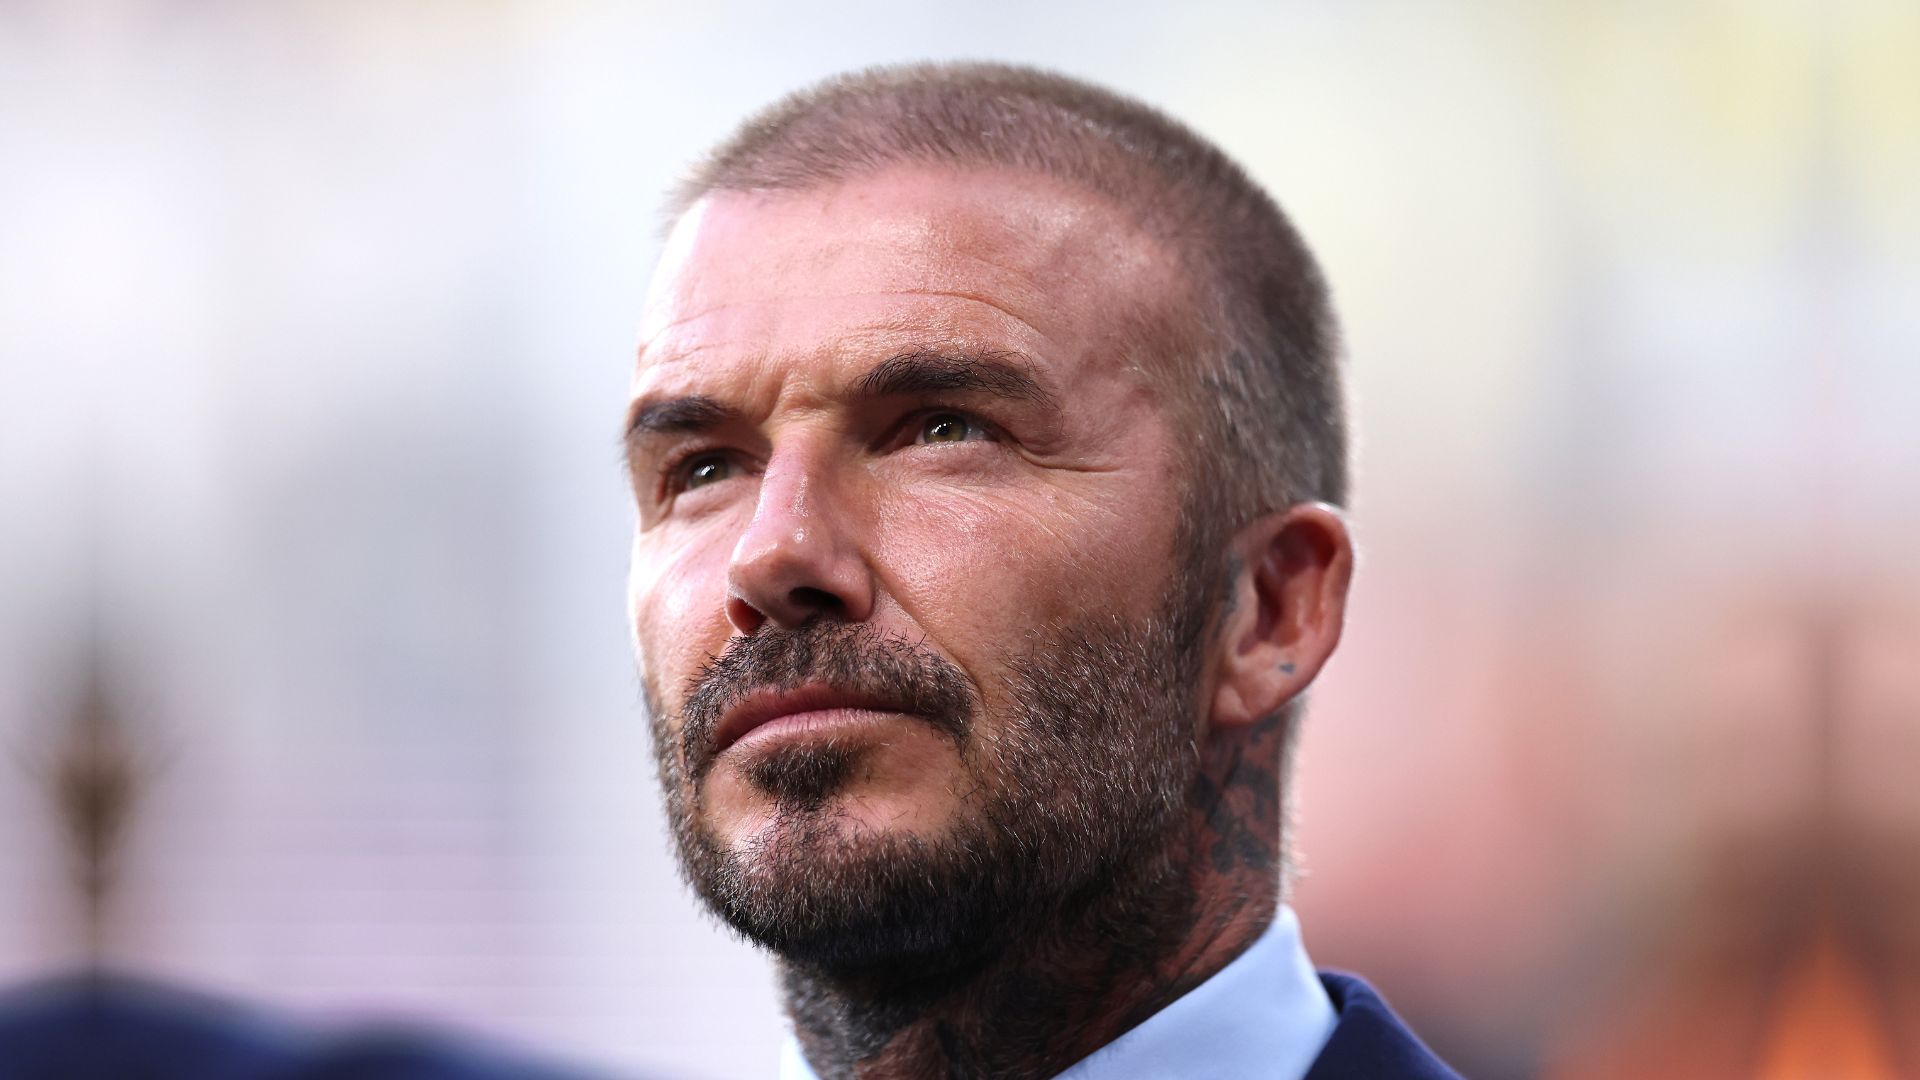 David Beckham with Long Comb Over with Beard | David Beckham Hairstyles in  Pictures: A Look at English Footballer's Best Hair Moments Over the Years  as He turns 43! | Latest Photos,